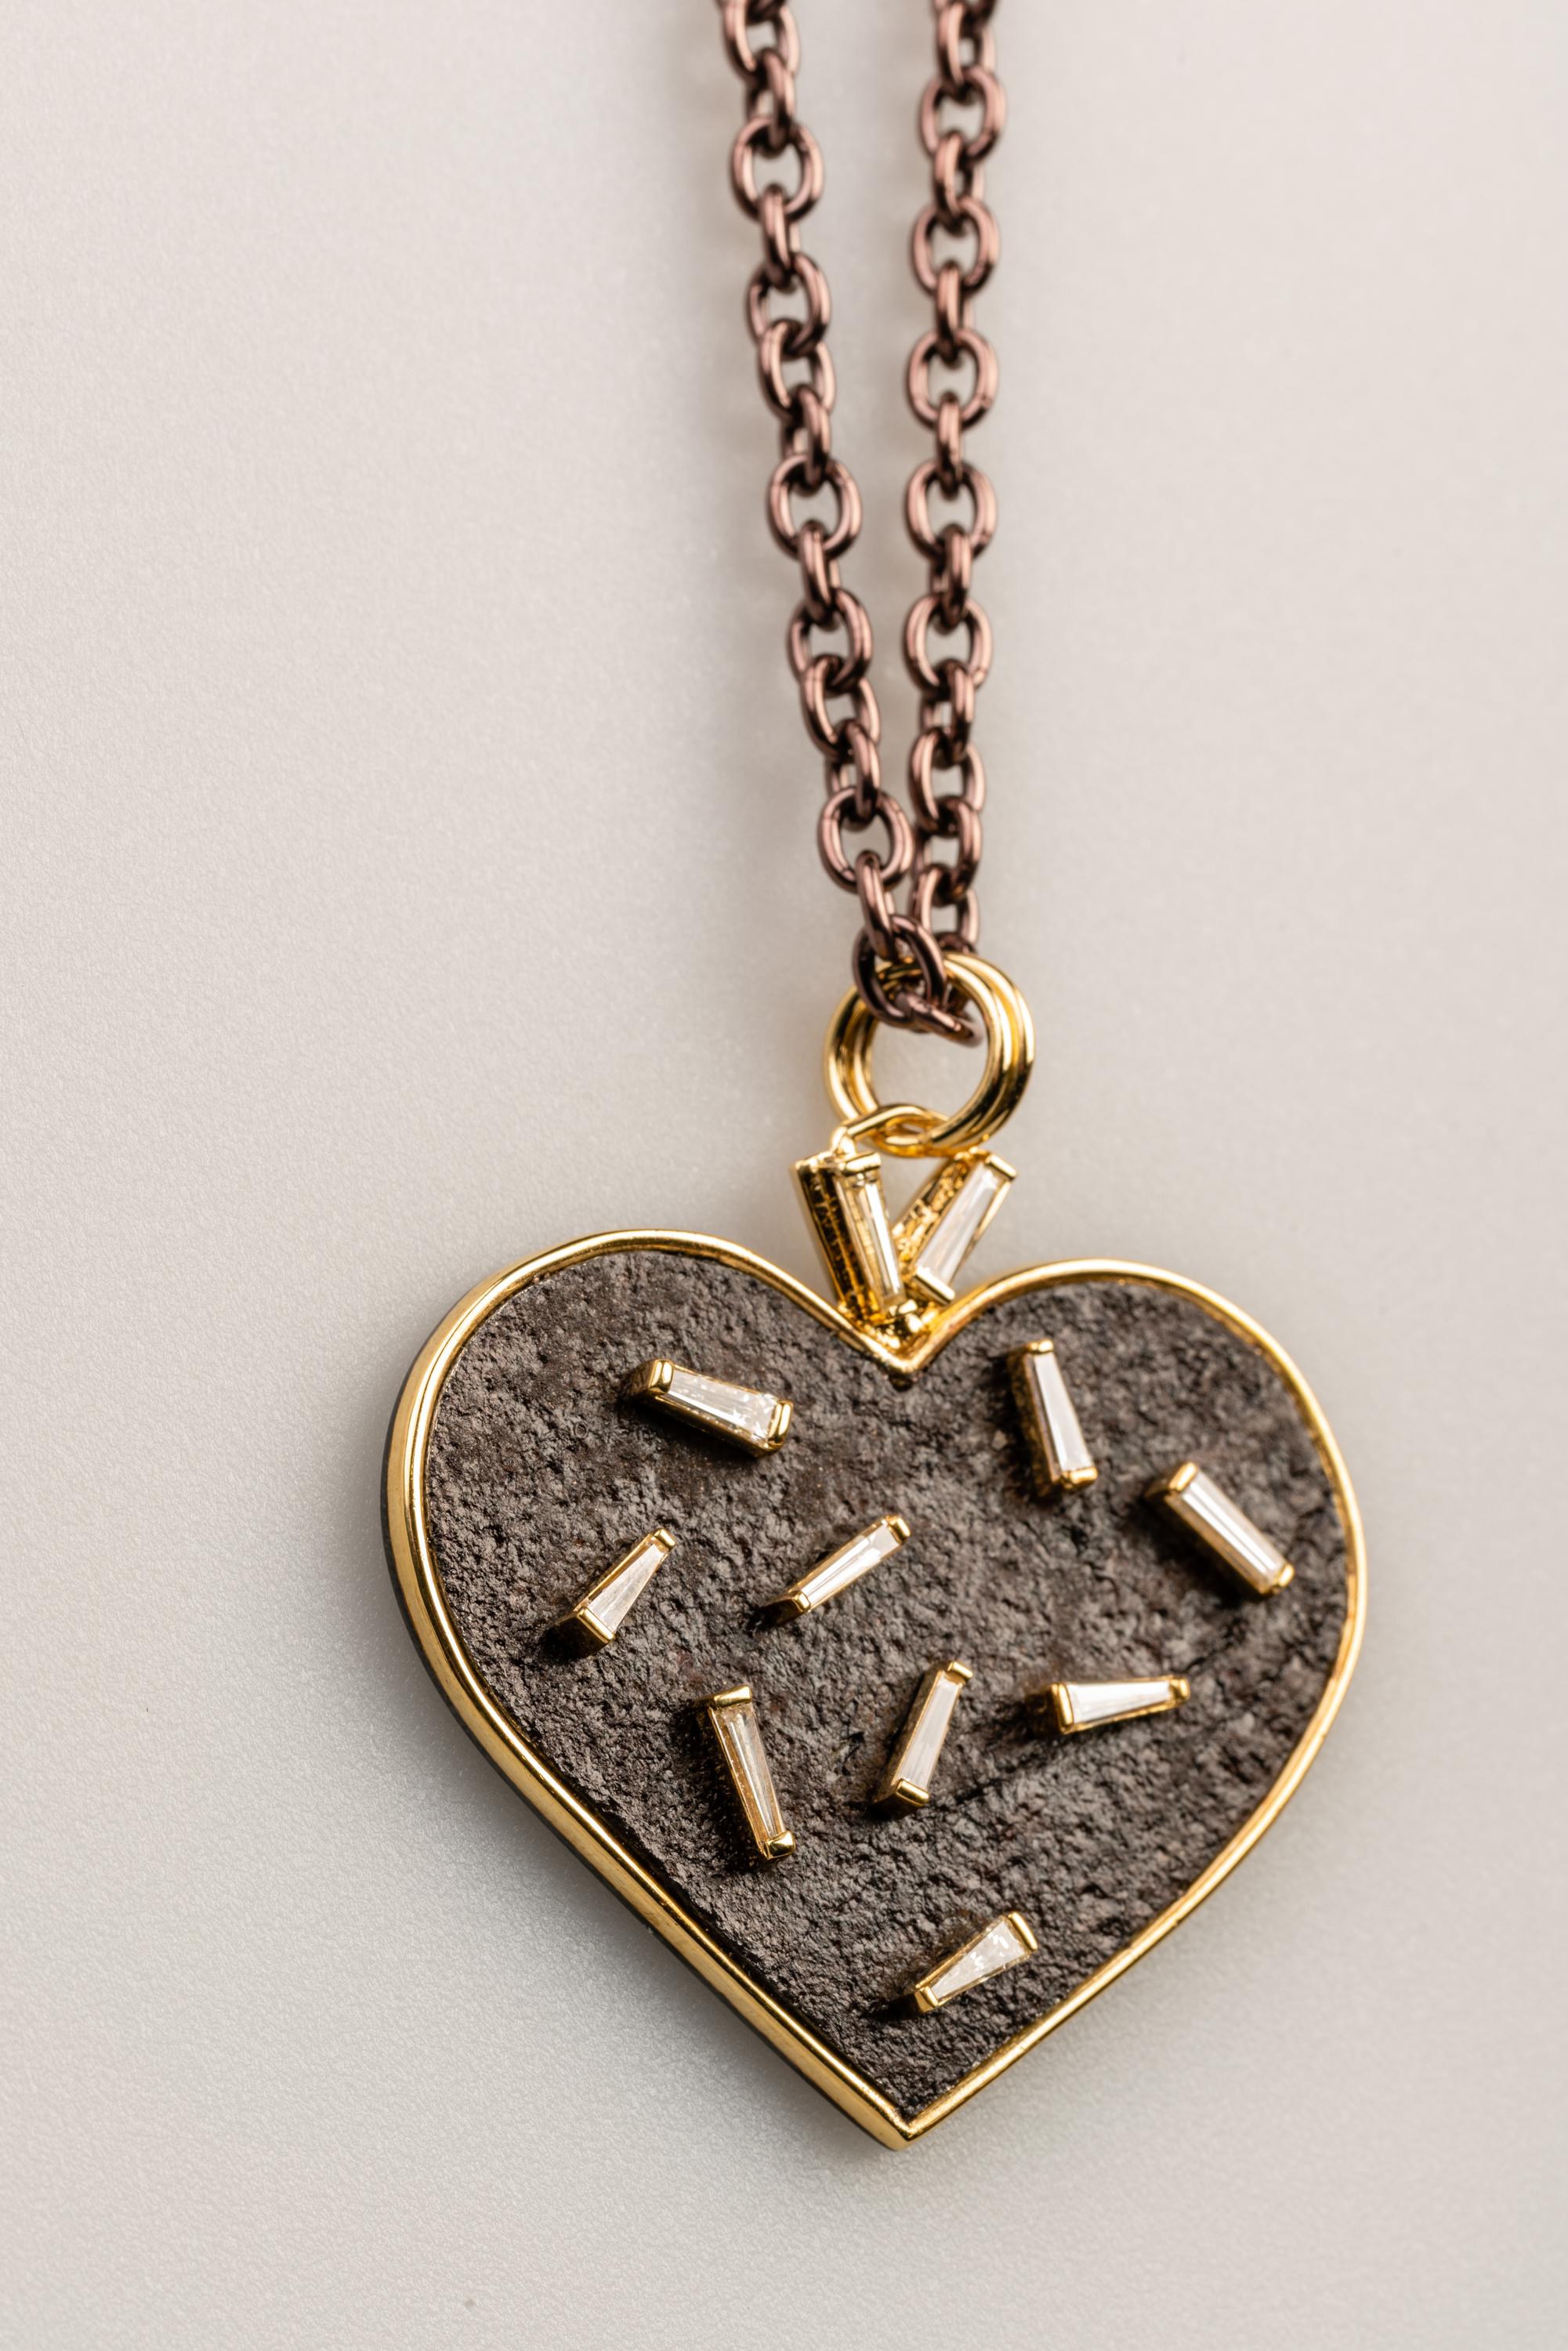 A 2020 Unbreakable Heart necklace, titled 